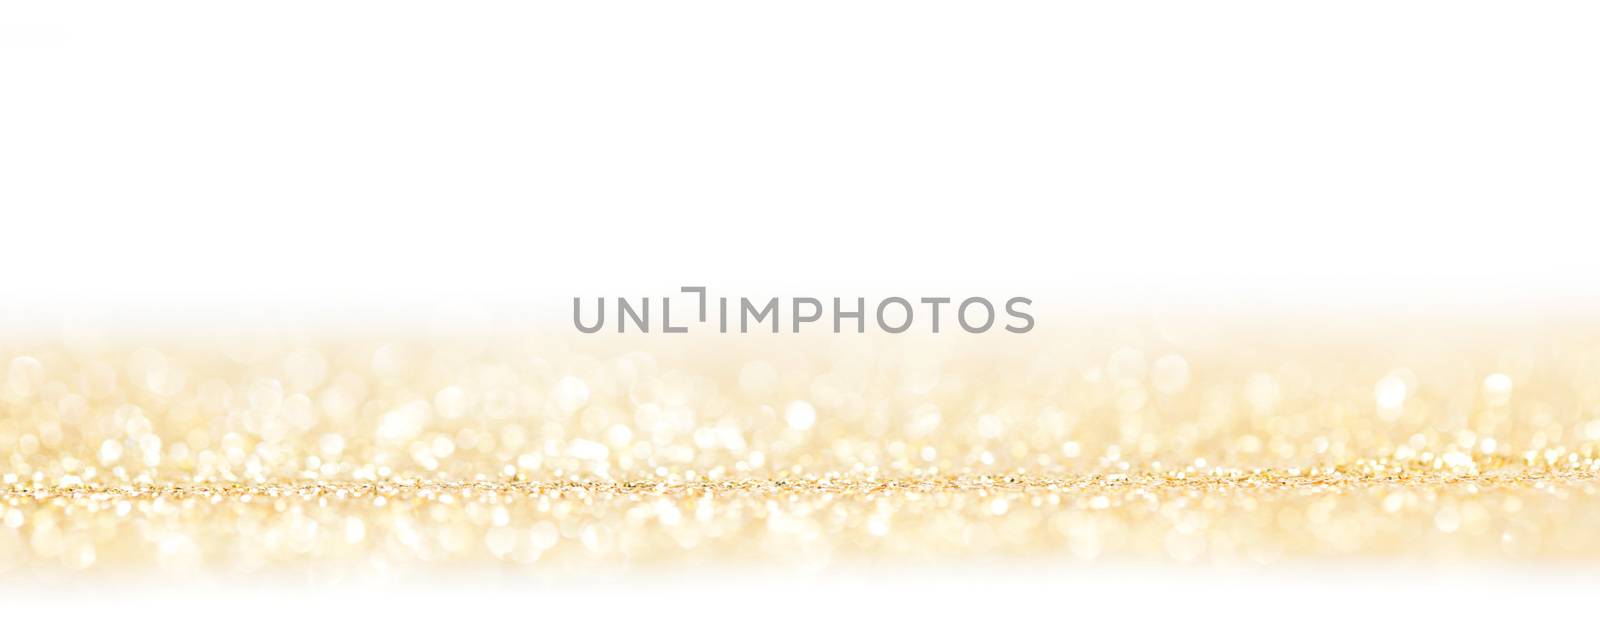 Glitters on white background by Yellowj